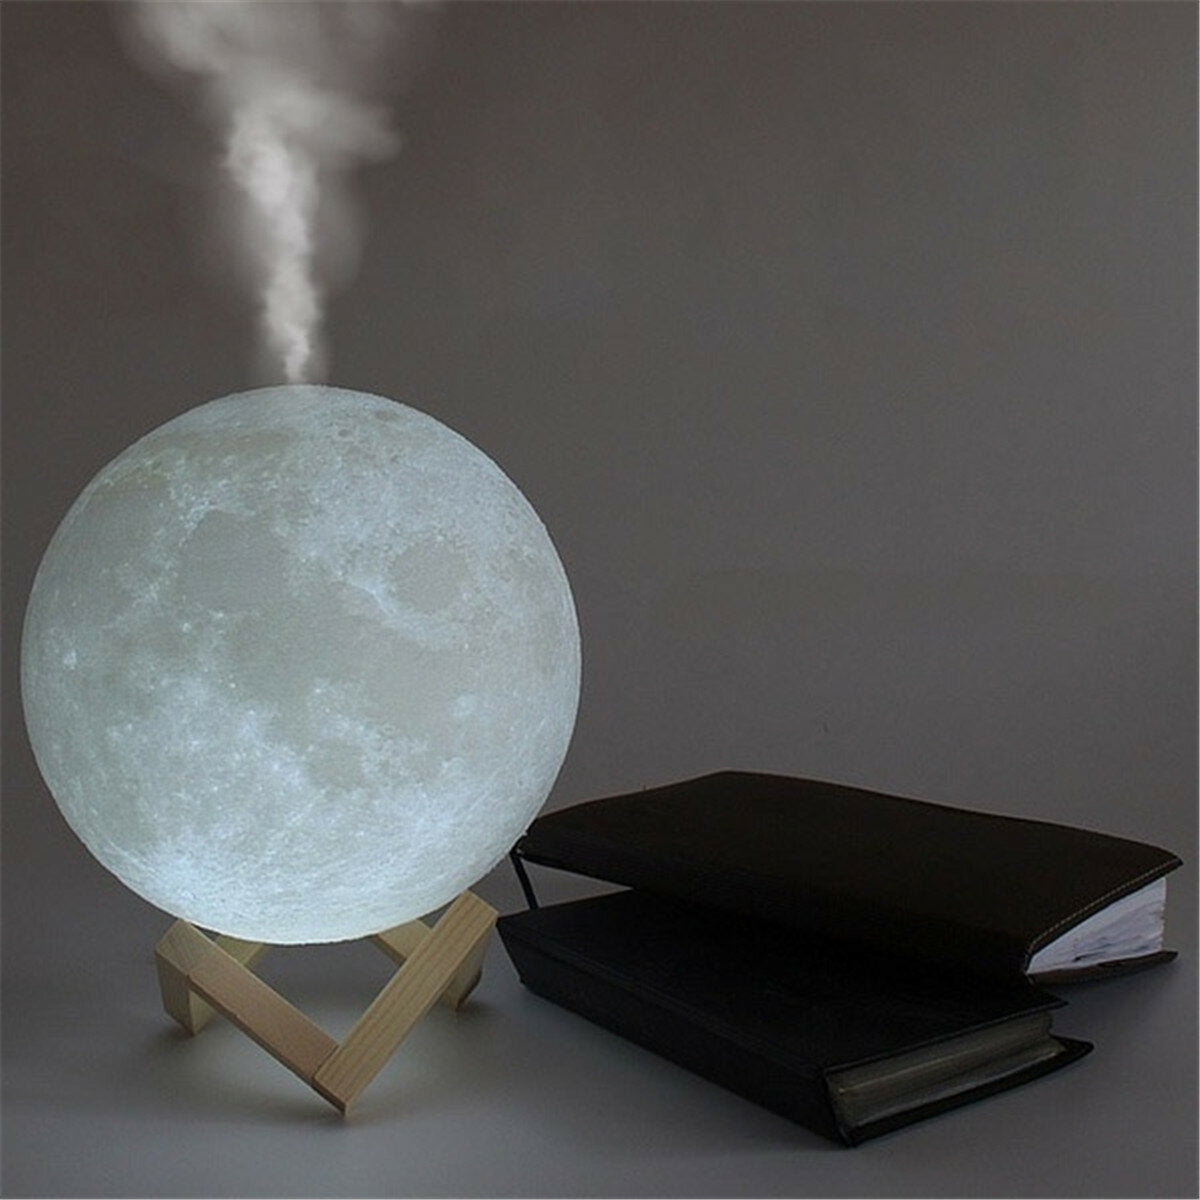 880ML 3D LED Night Light Air Humidifier Moon Lamp Aroma Essential Oil Diffuser